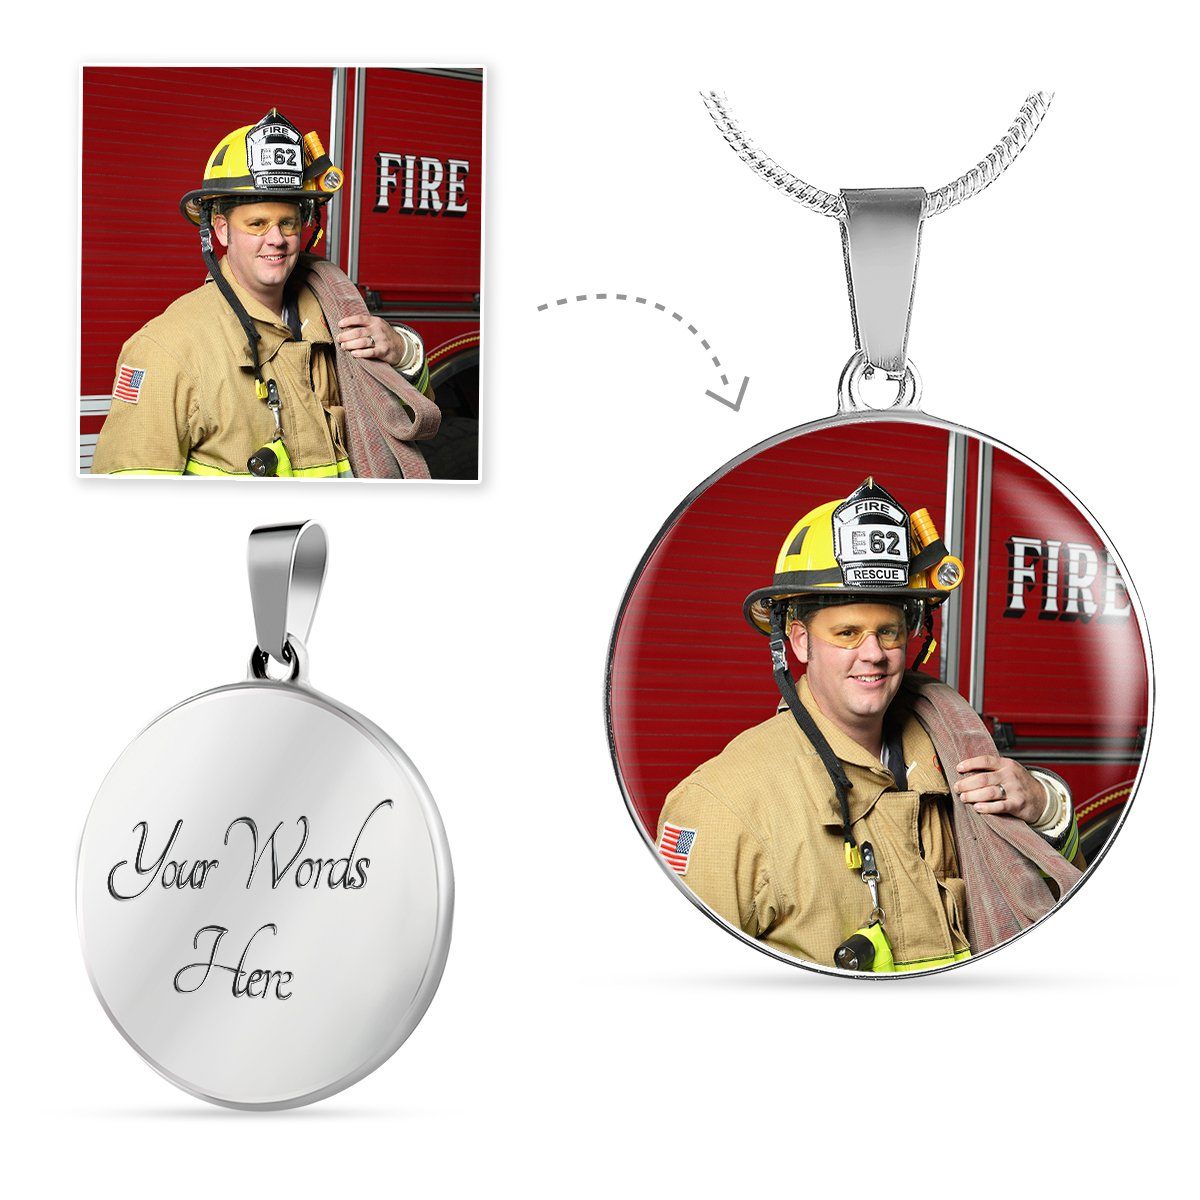 Firefighter Personalized Photo Circle Necklace - Heroic Defender